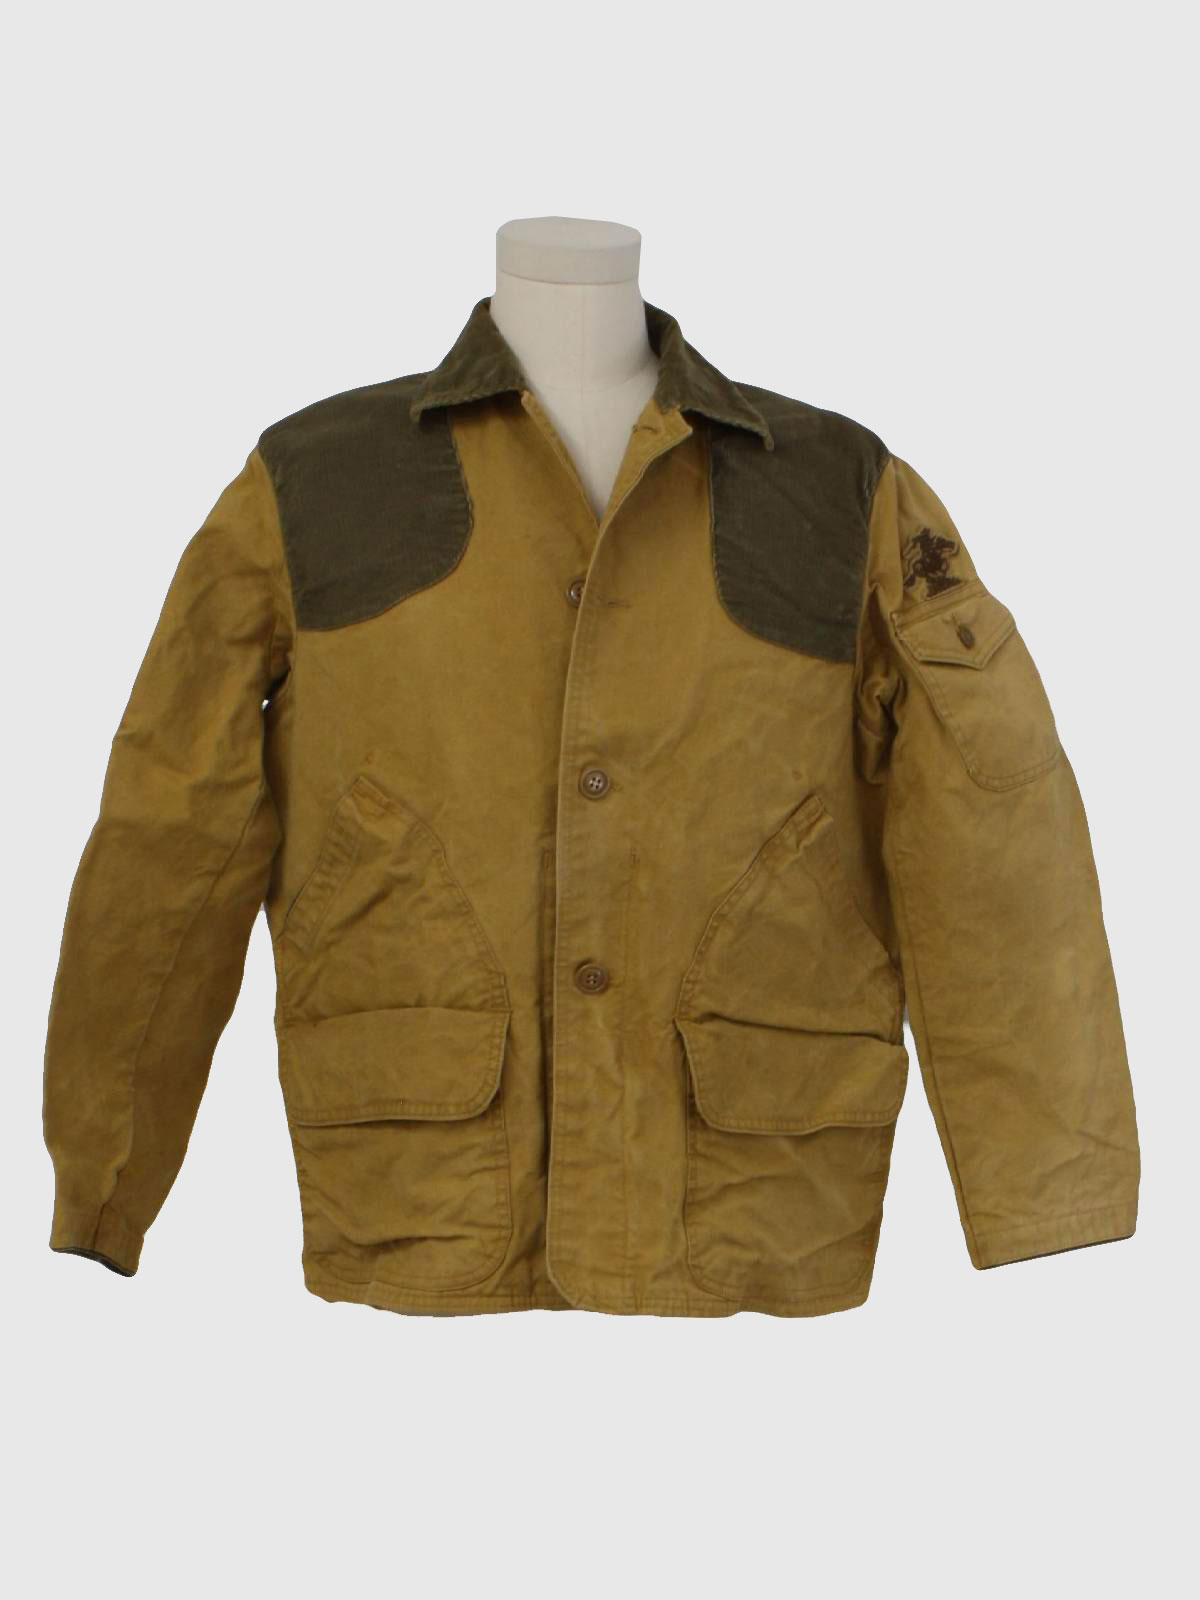 1950's Vintage Winchester Jacket: 50s -Winchester- Mens tan and olive